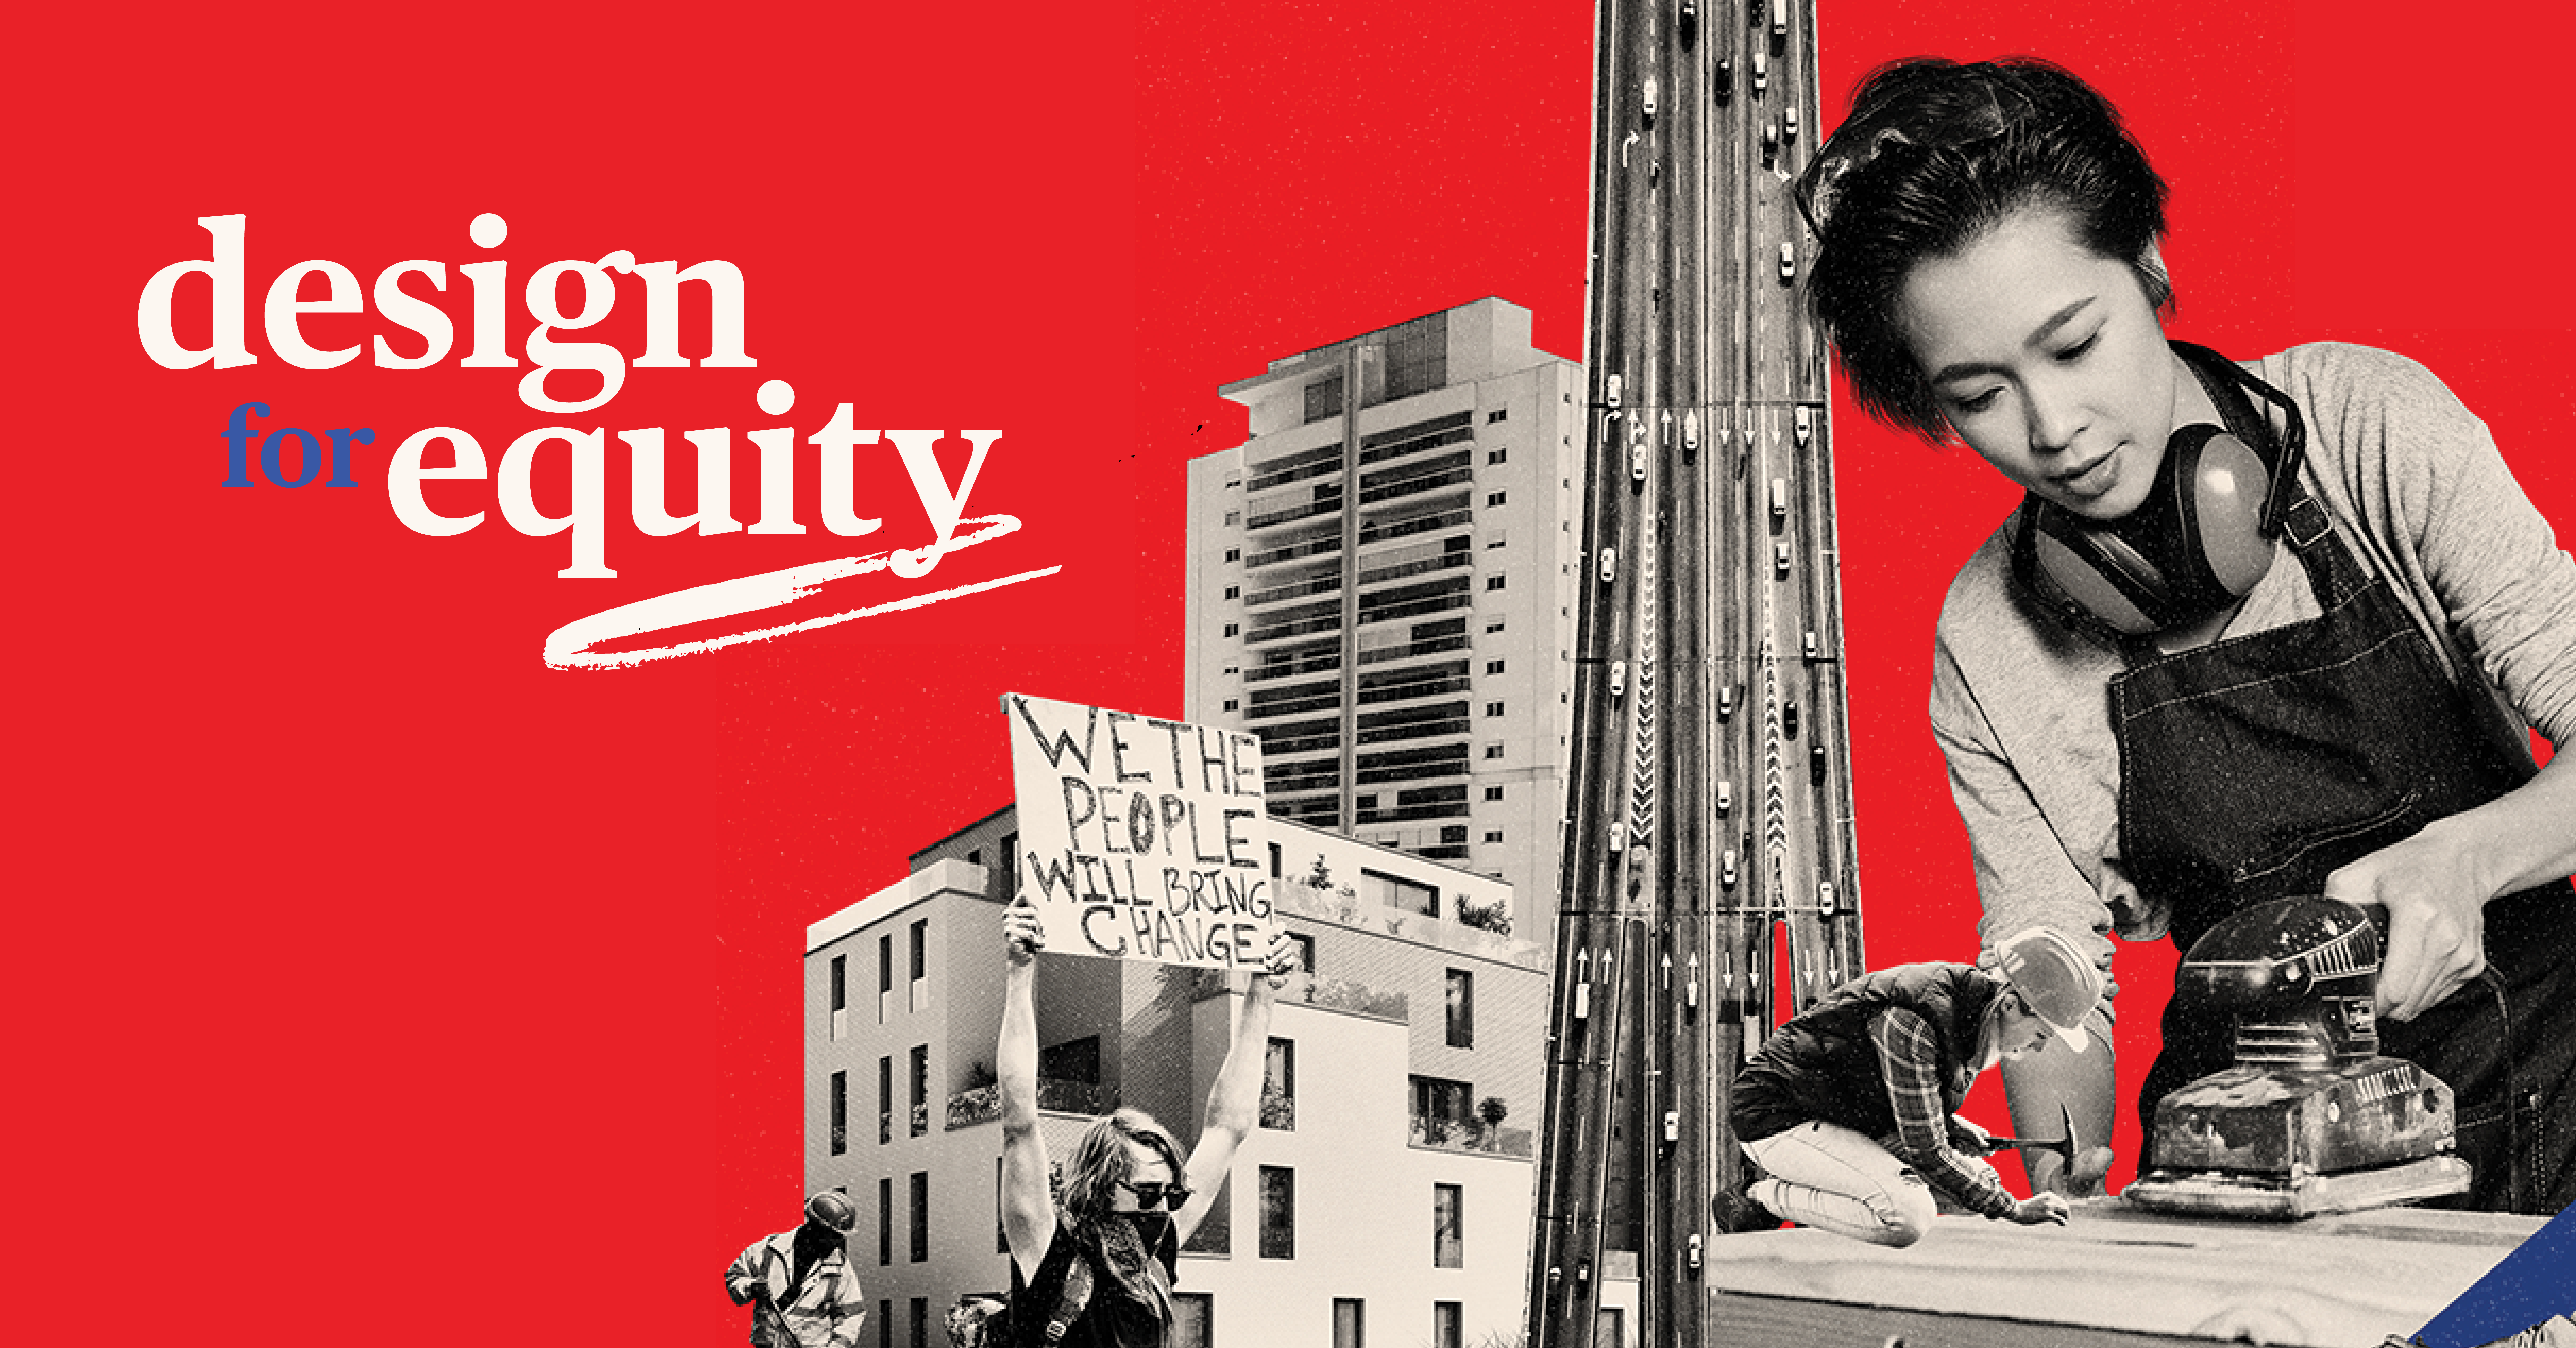 a graphic of a woman using power tools, a highway, a protester, and a group of buildings, the words "Design for Equity" appear in the background